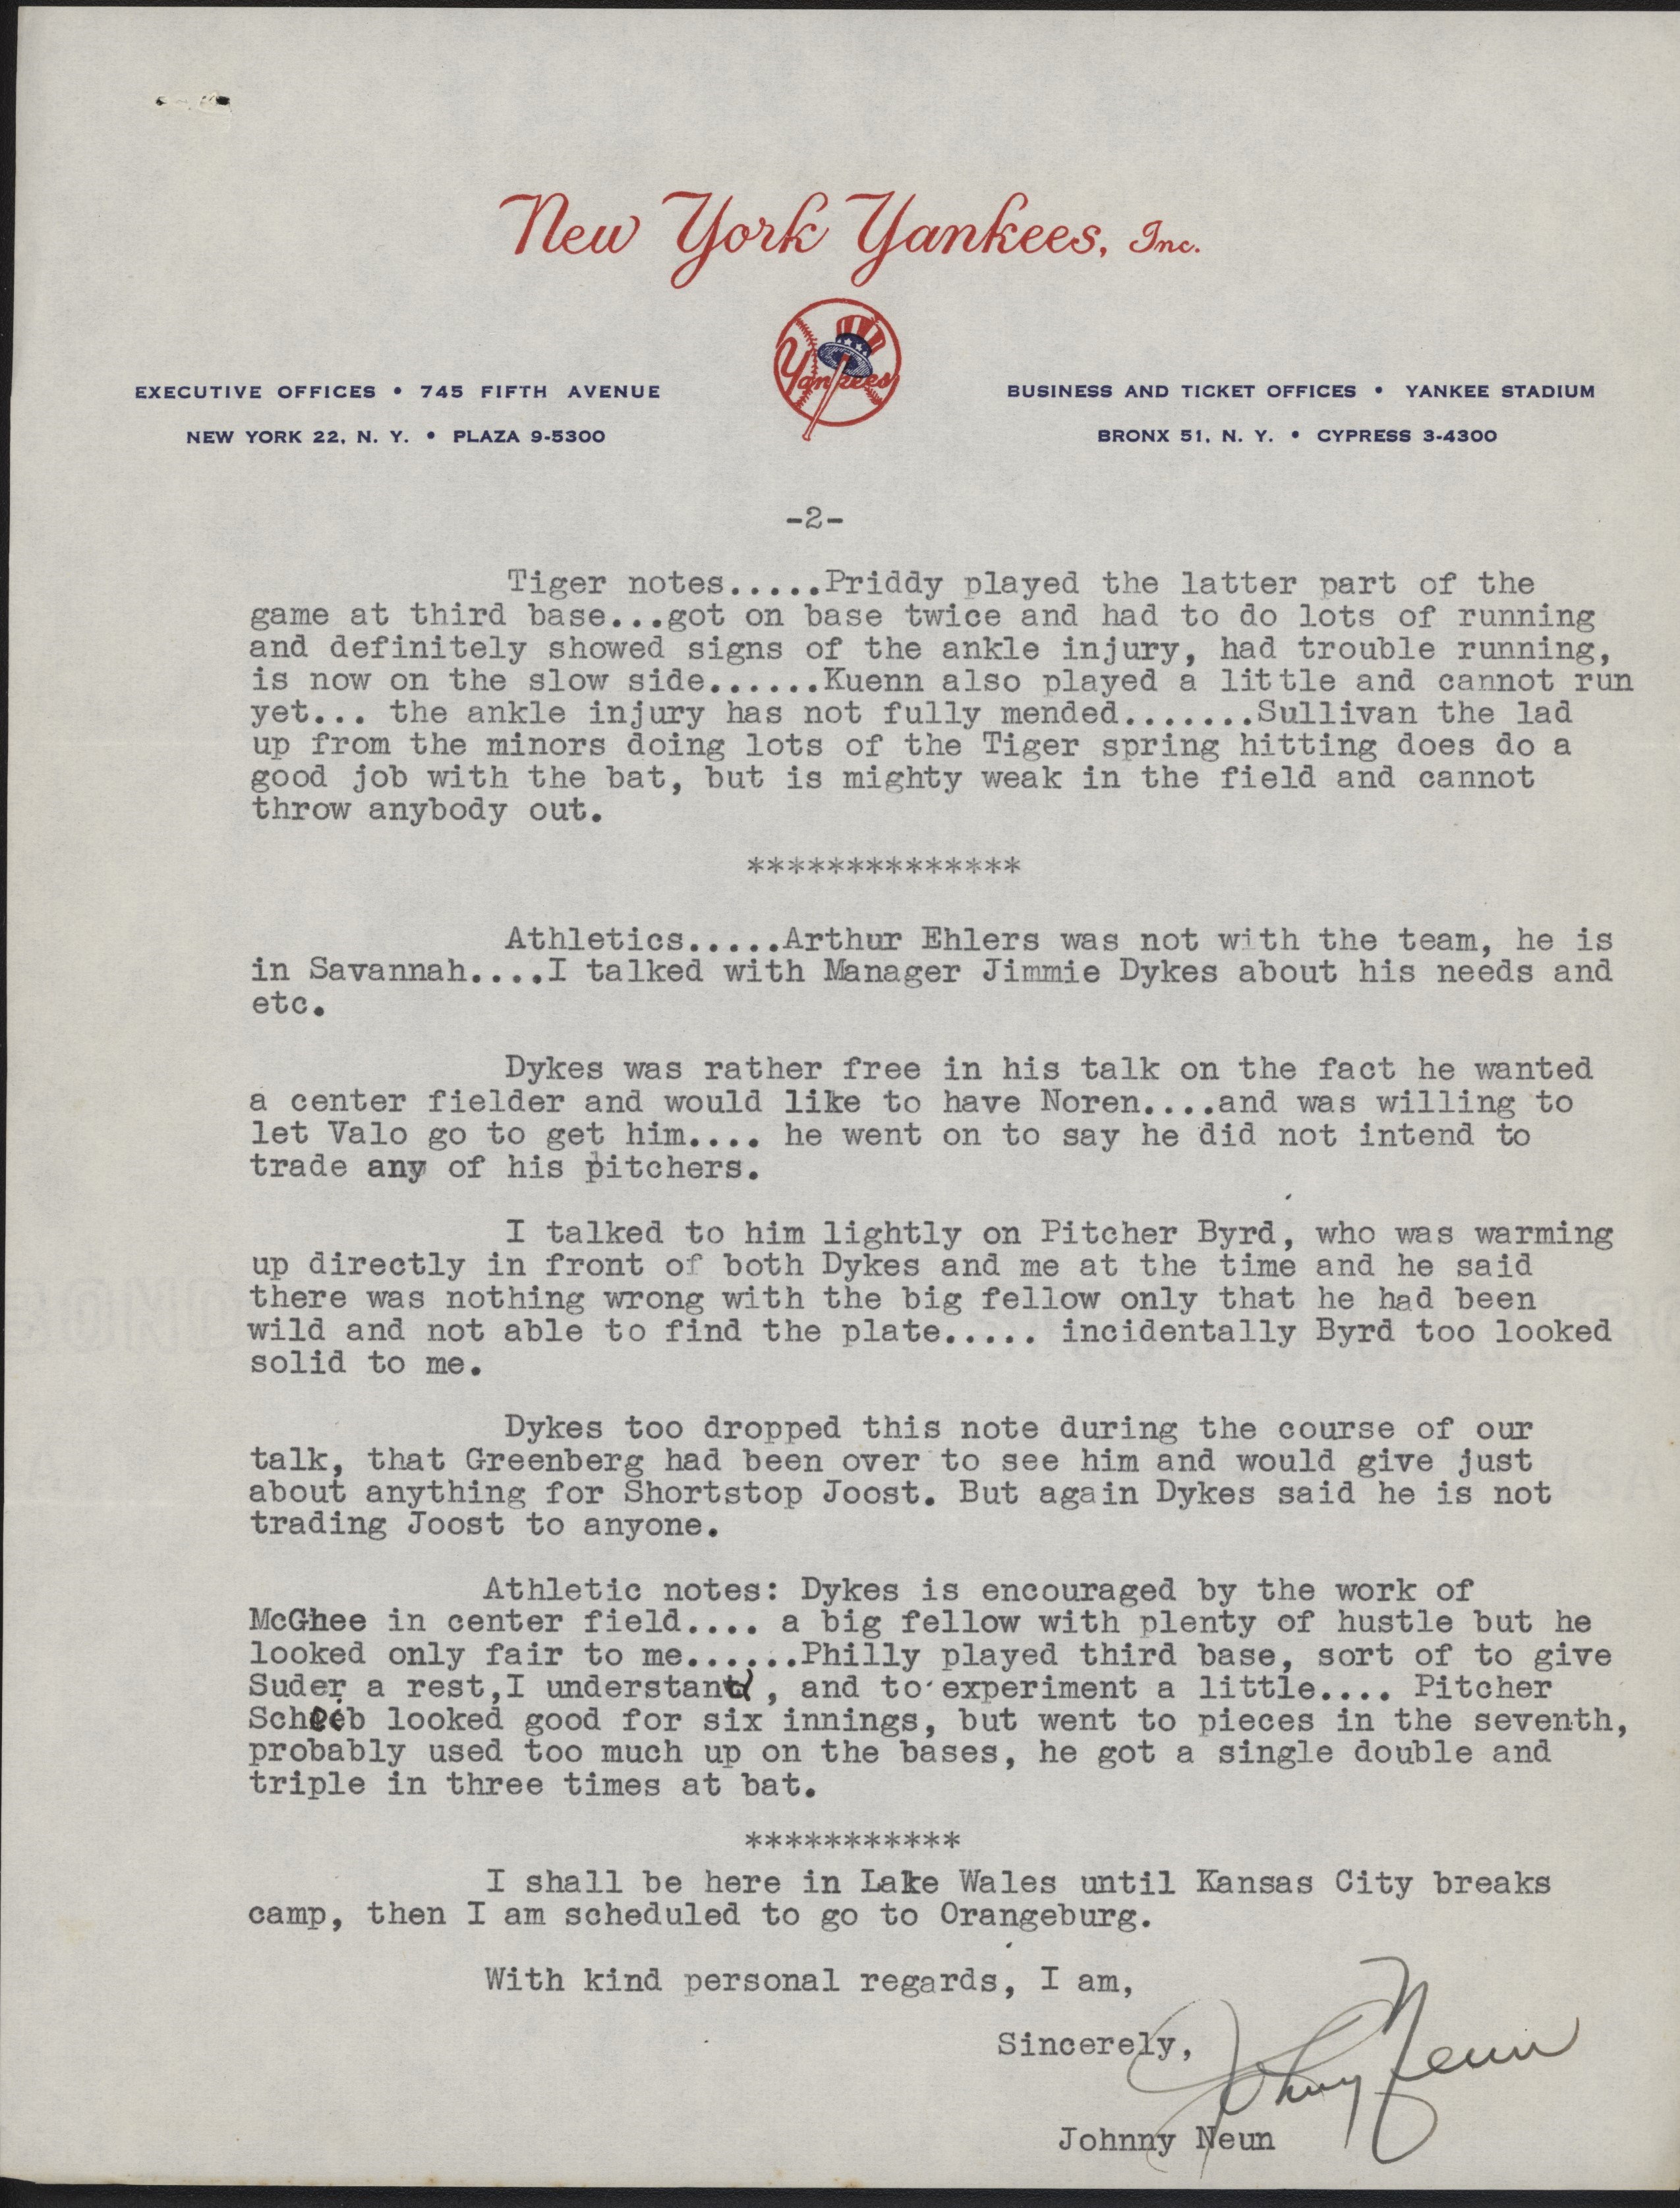 NY Yankees, Giants & Mets - 1953 Yankees Scouting Report to George Weiss